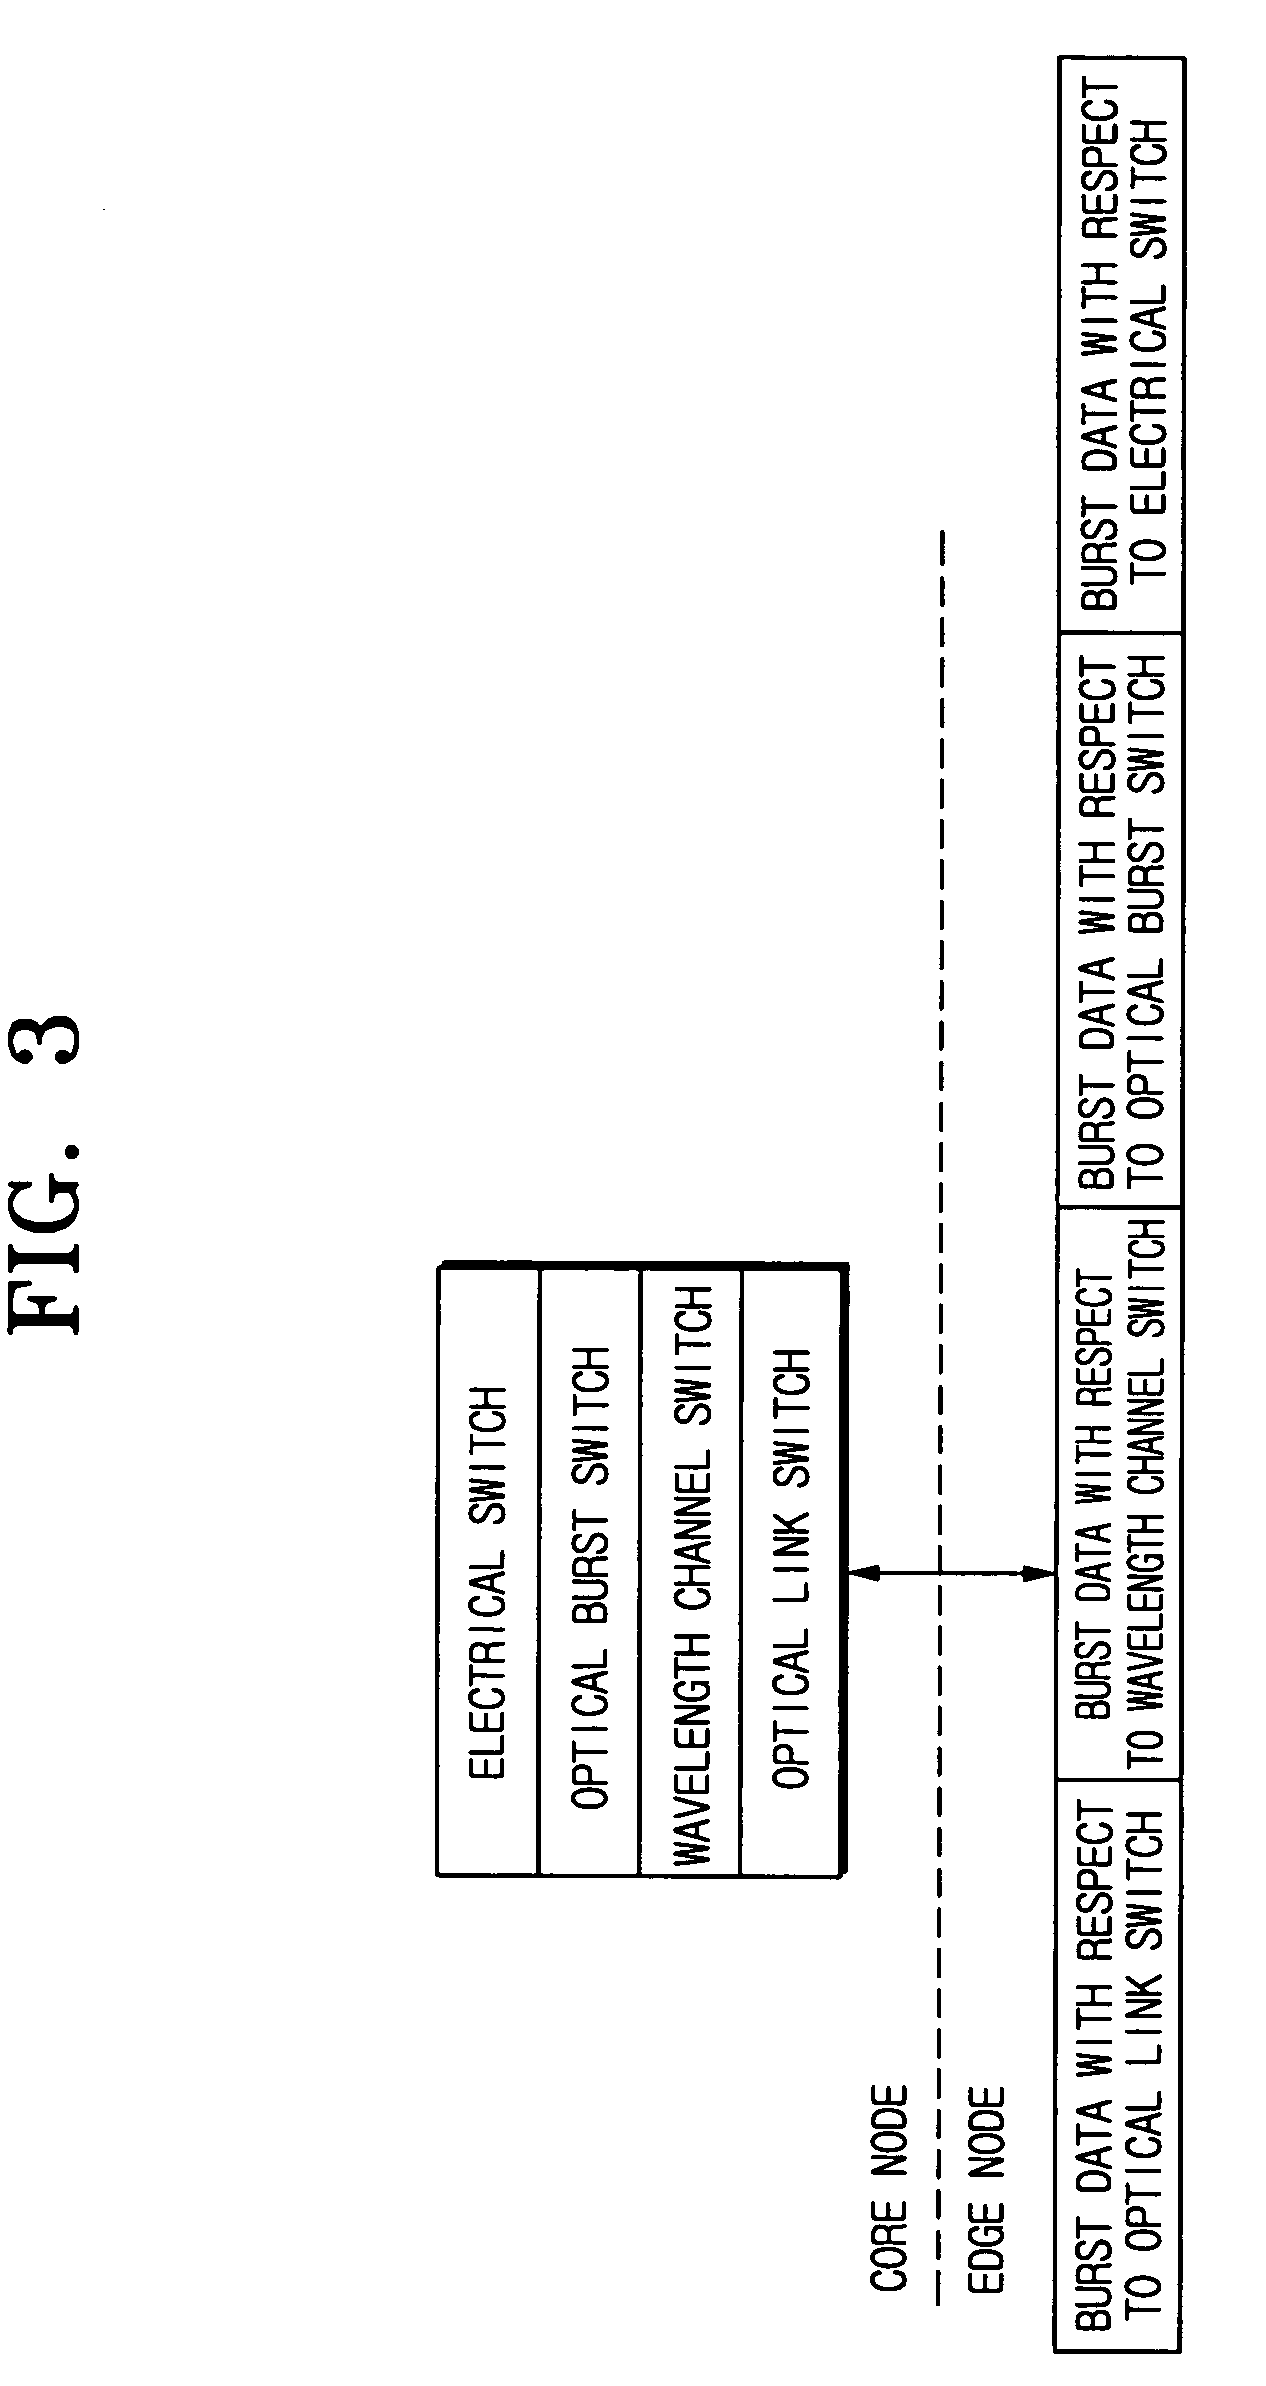 Multi switching architecture and method in optical burst switching network